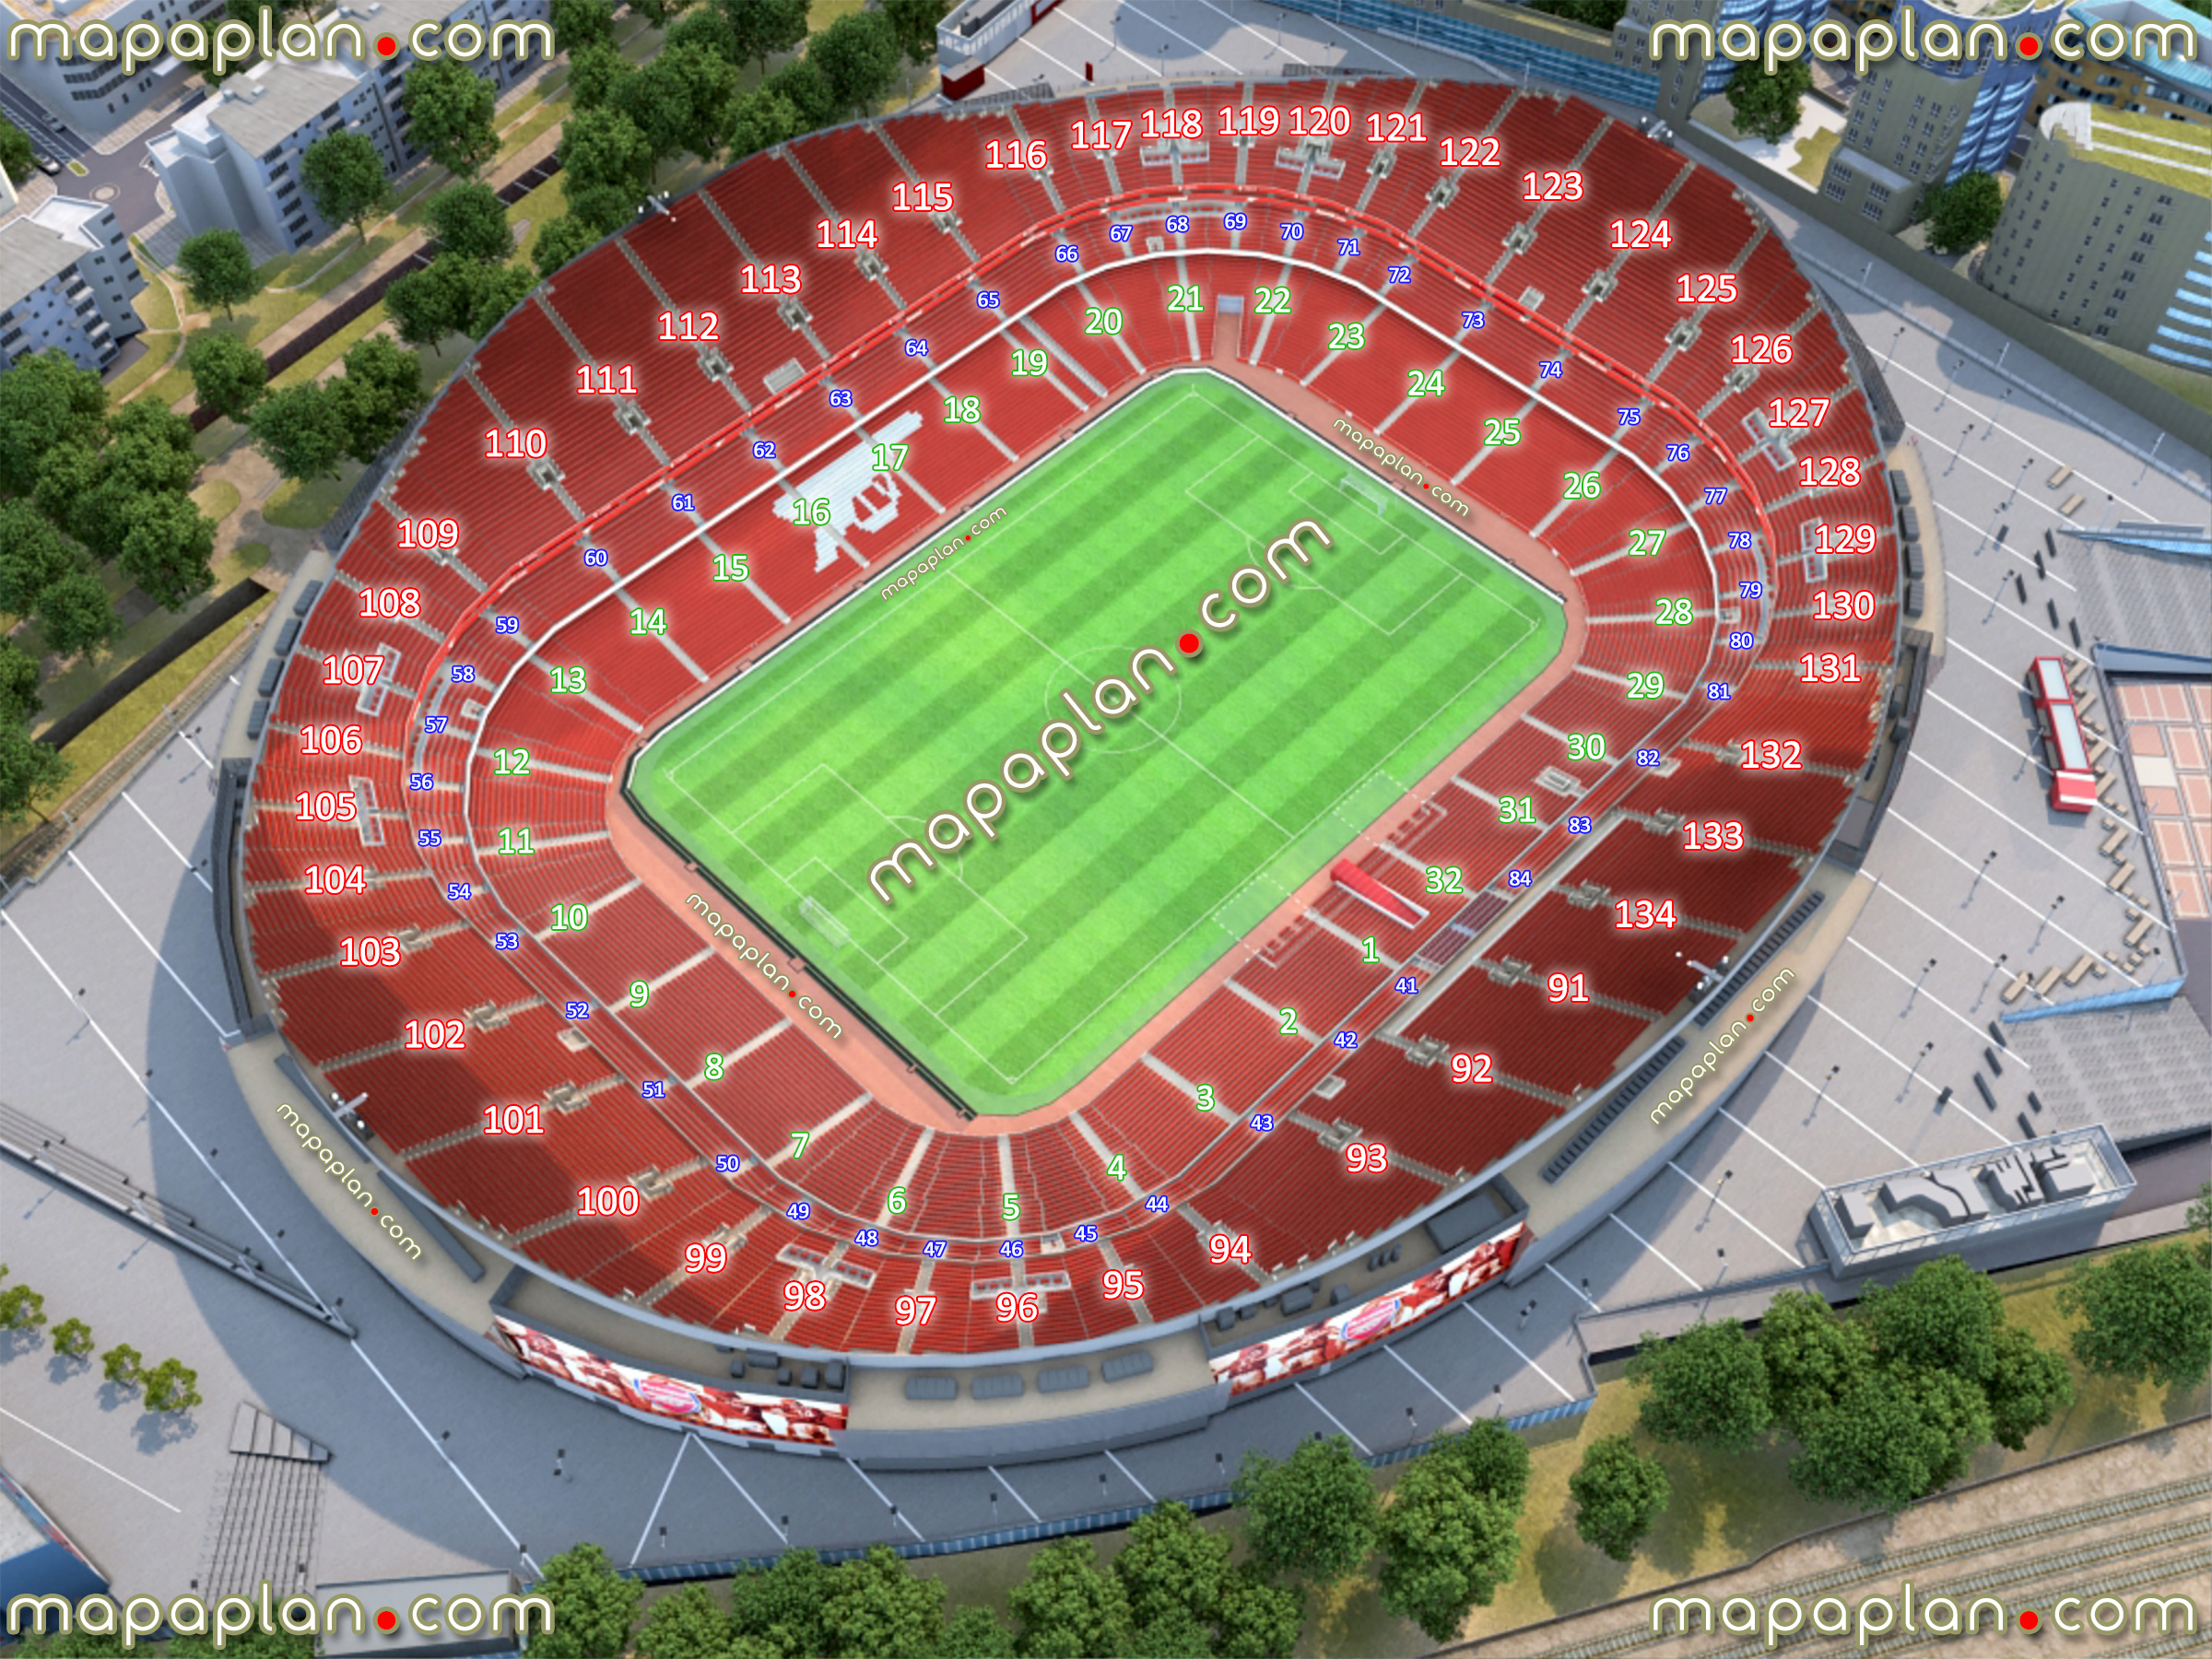 London Arsenal Emirates Stadium seating plan map seating plan arsenal london football games exact block numbers rows seats selection lower upper tier club level layout sports arena ticket prices review diagram